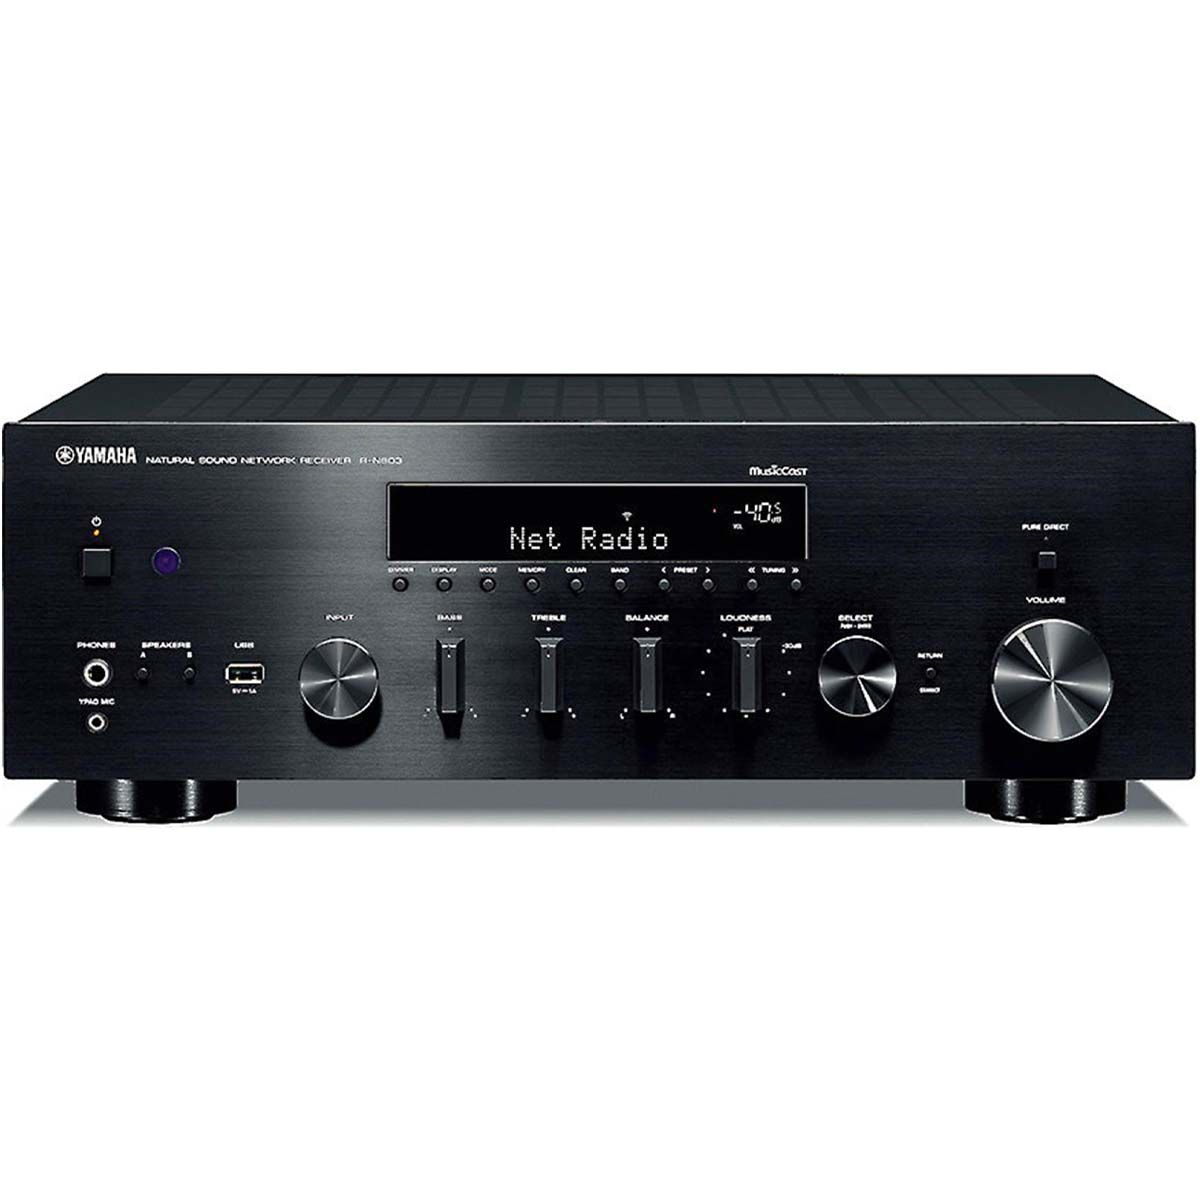 Yamaha R-N803BL Network Stereo Receiver - Black - front view